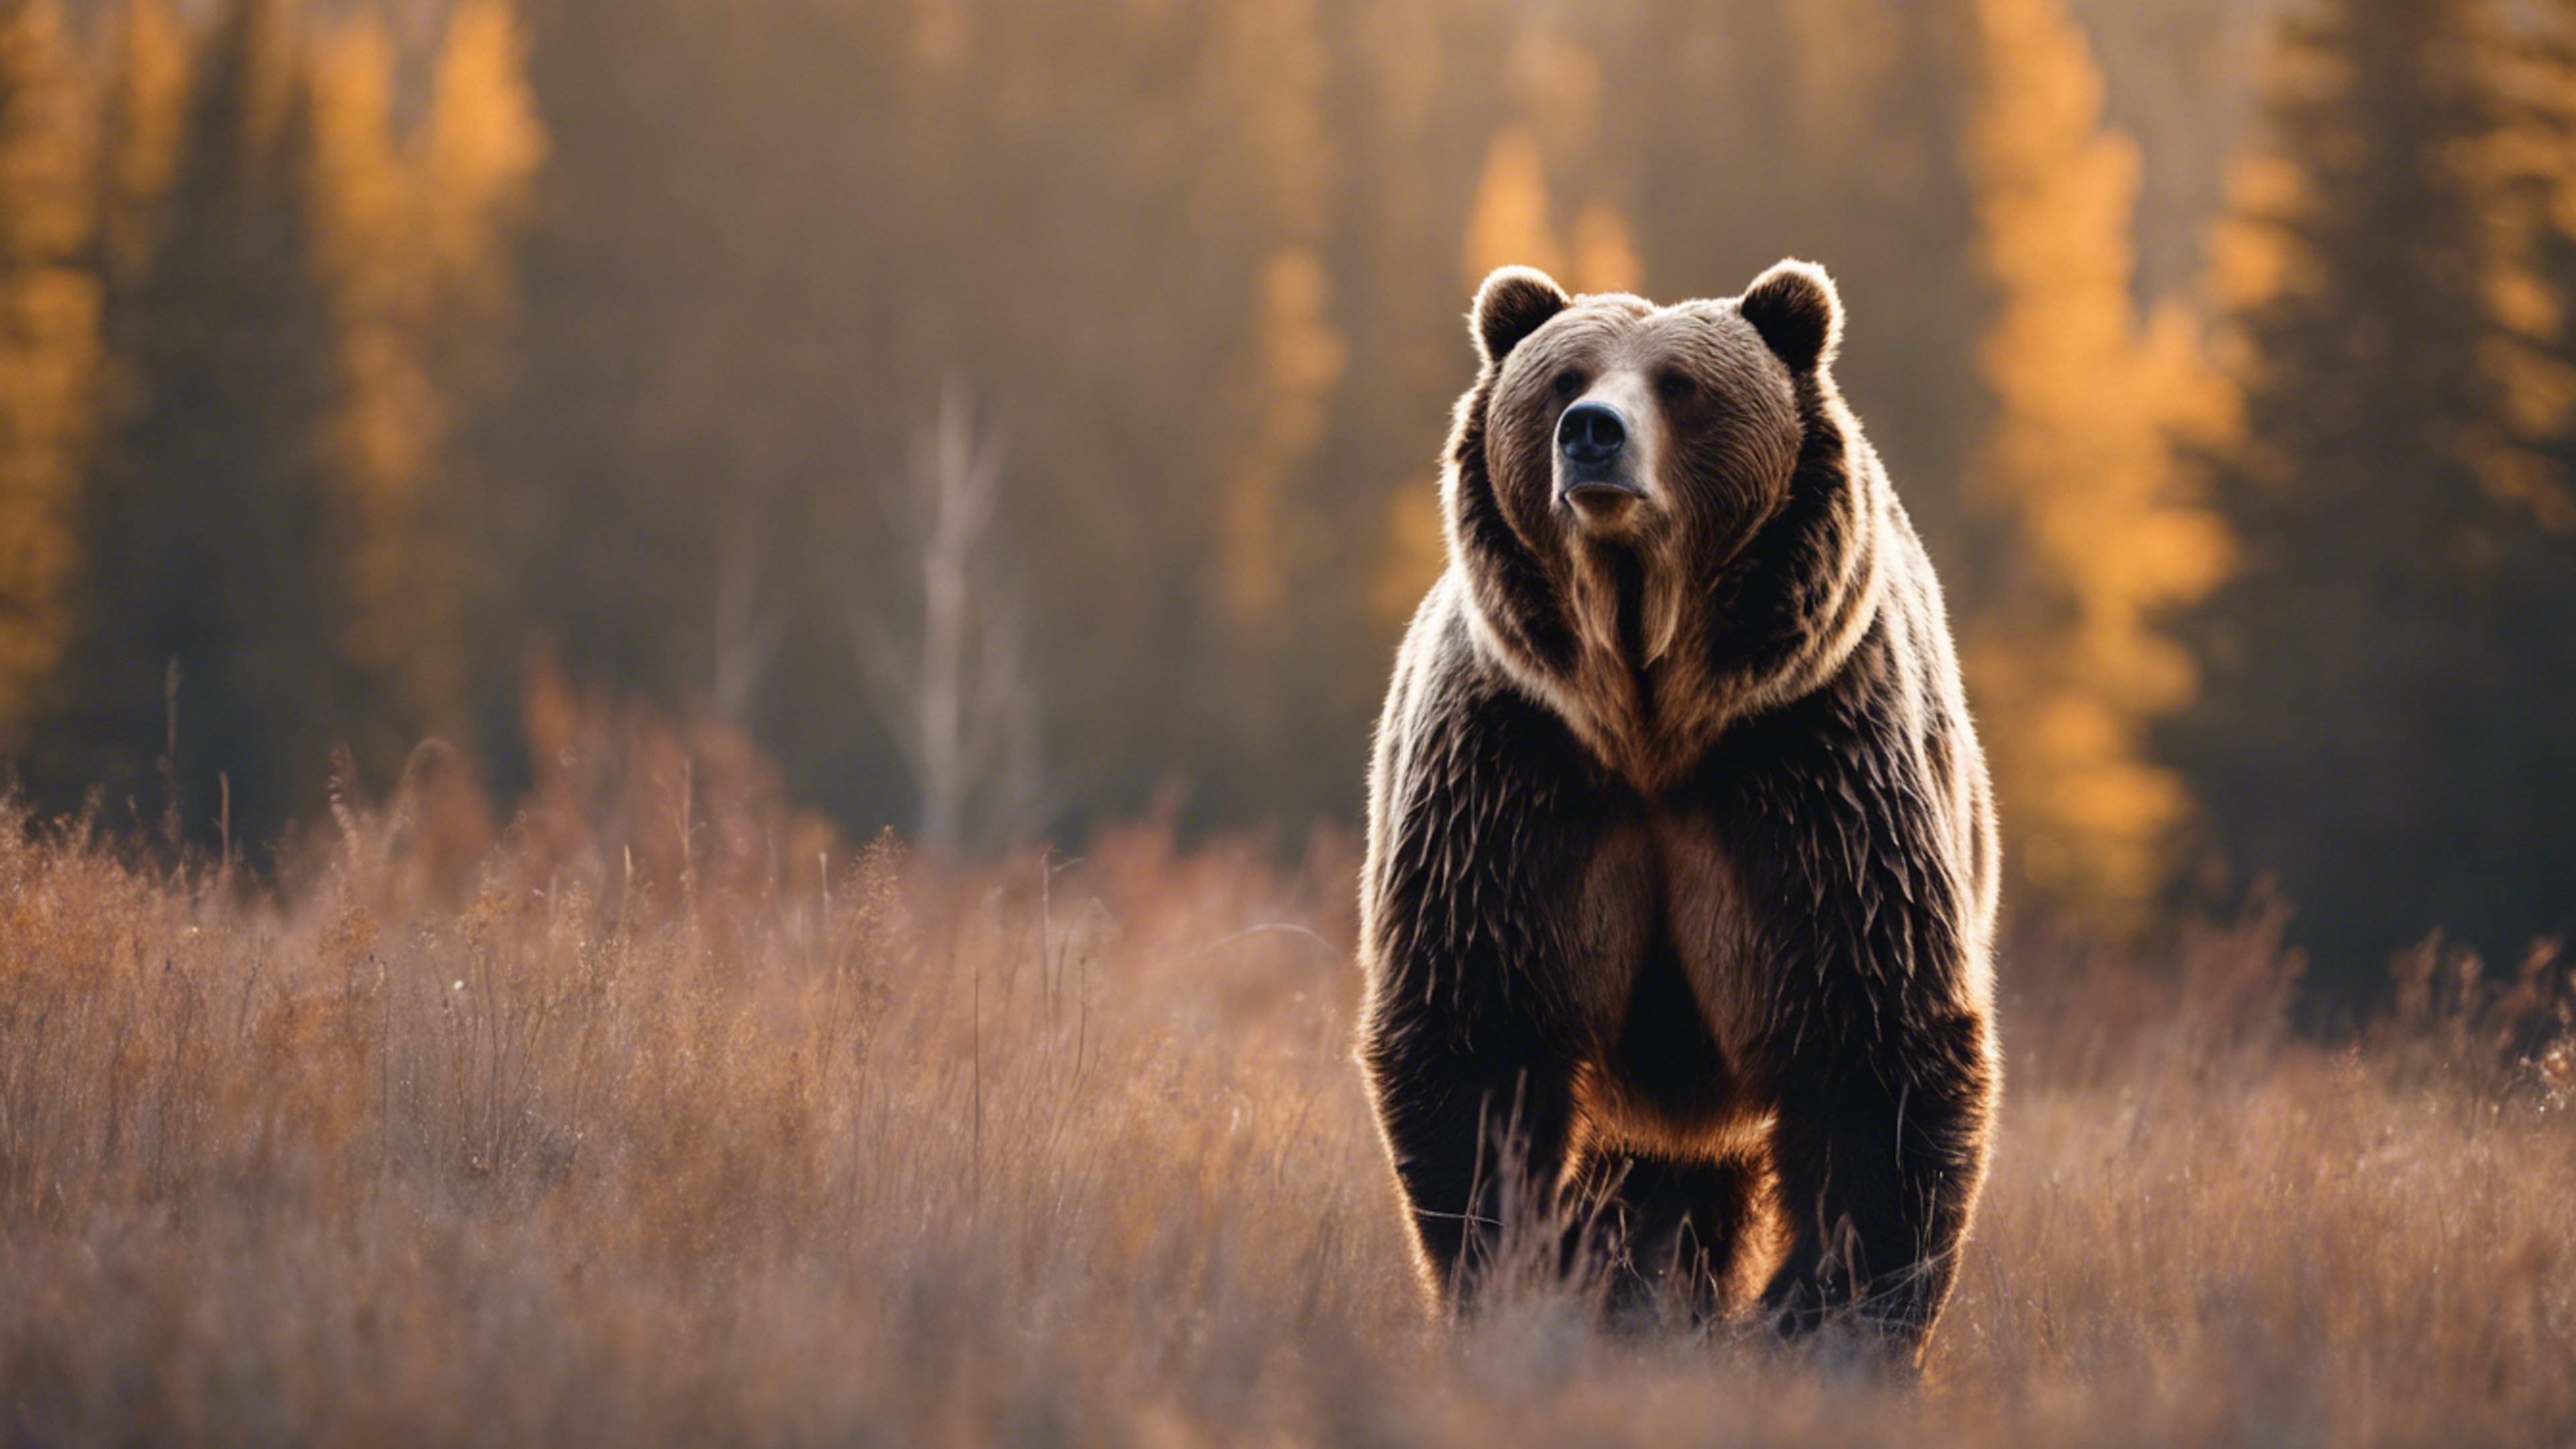 A majestic brown grizzly bear standing tall in the wild Fond d'écran[4fb1e3b24f2c4984aff0]